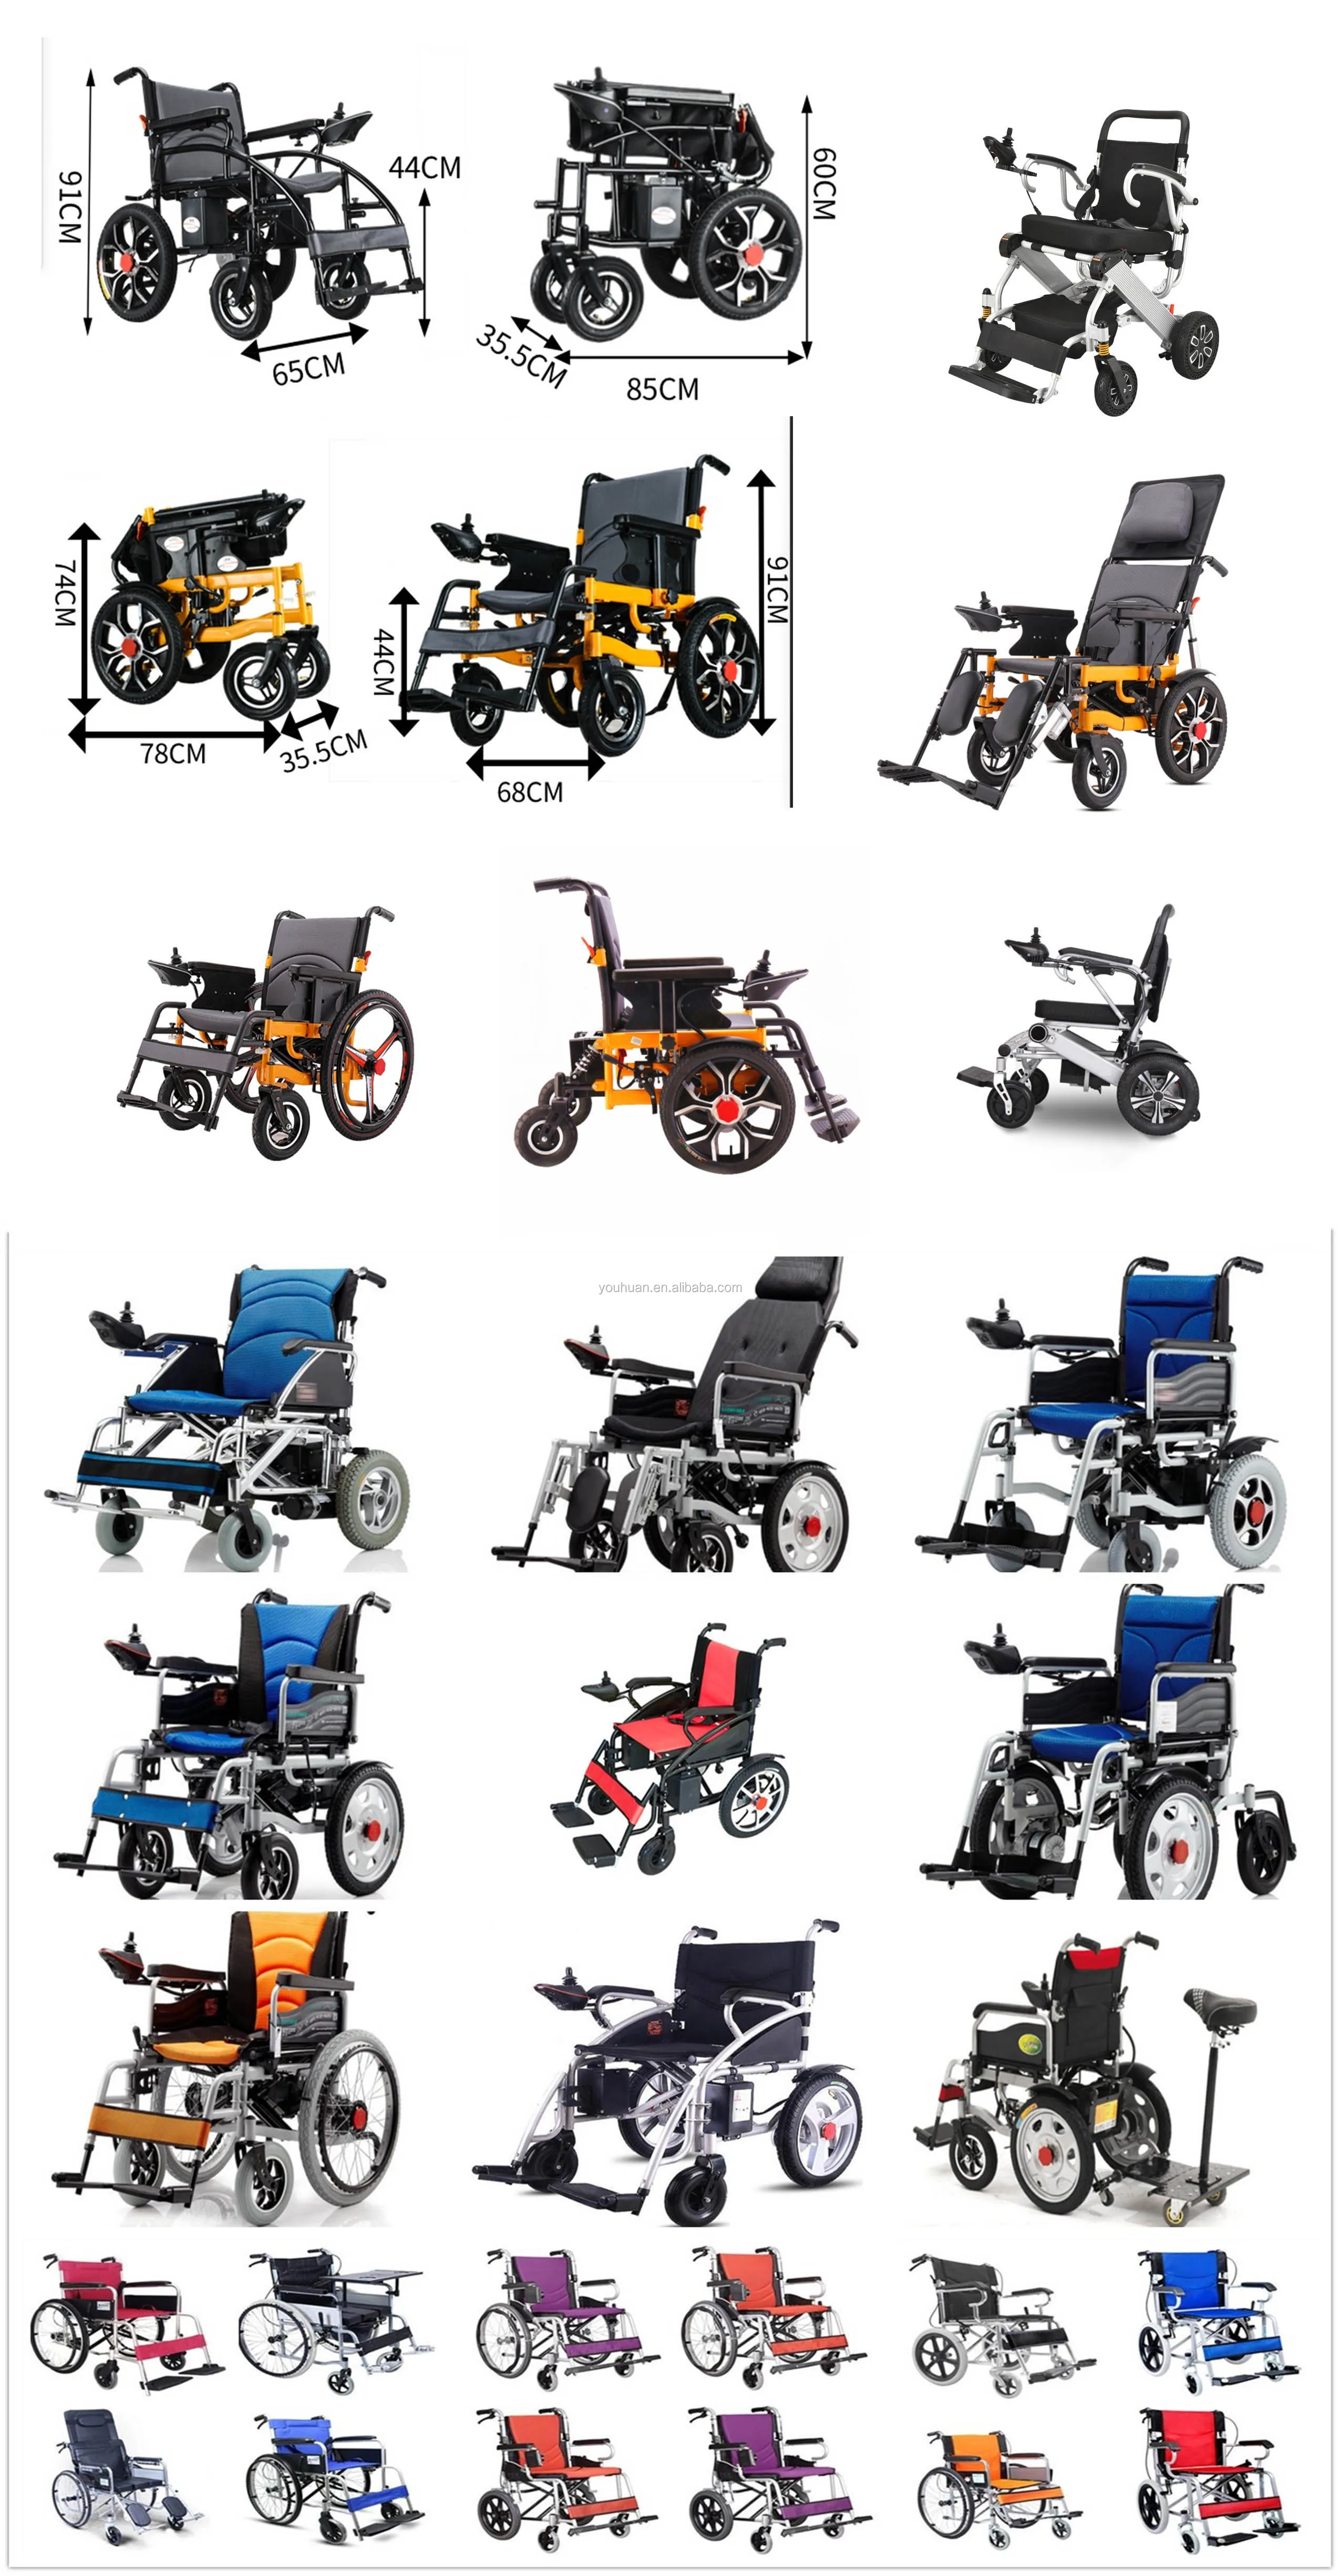 Electric power wheelchair with bag for travel use